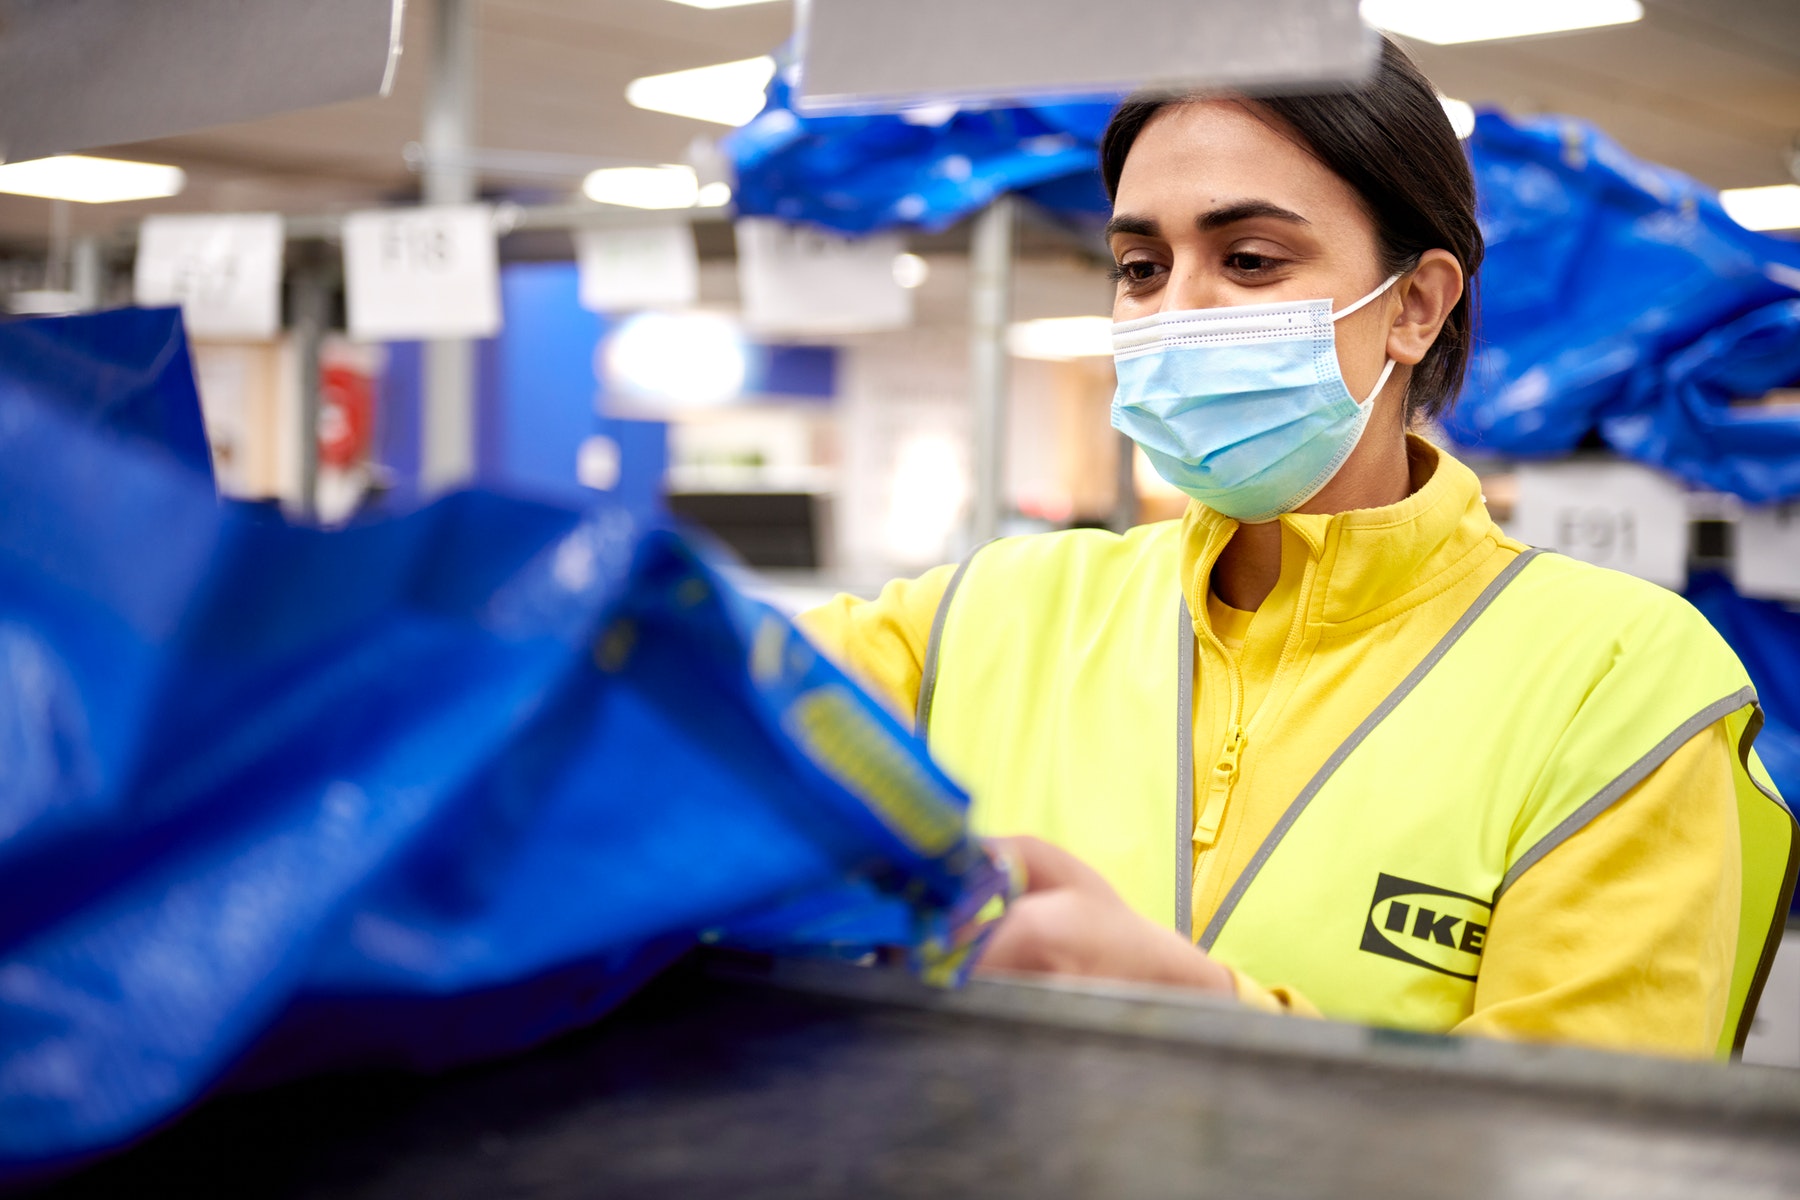 Happy IKEA employee wearing a mask for protection